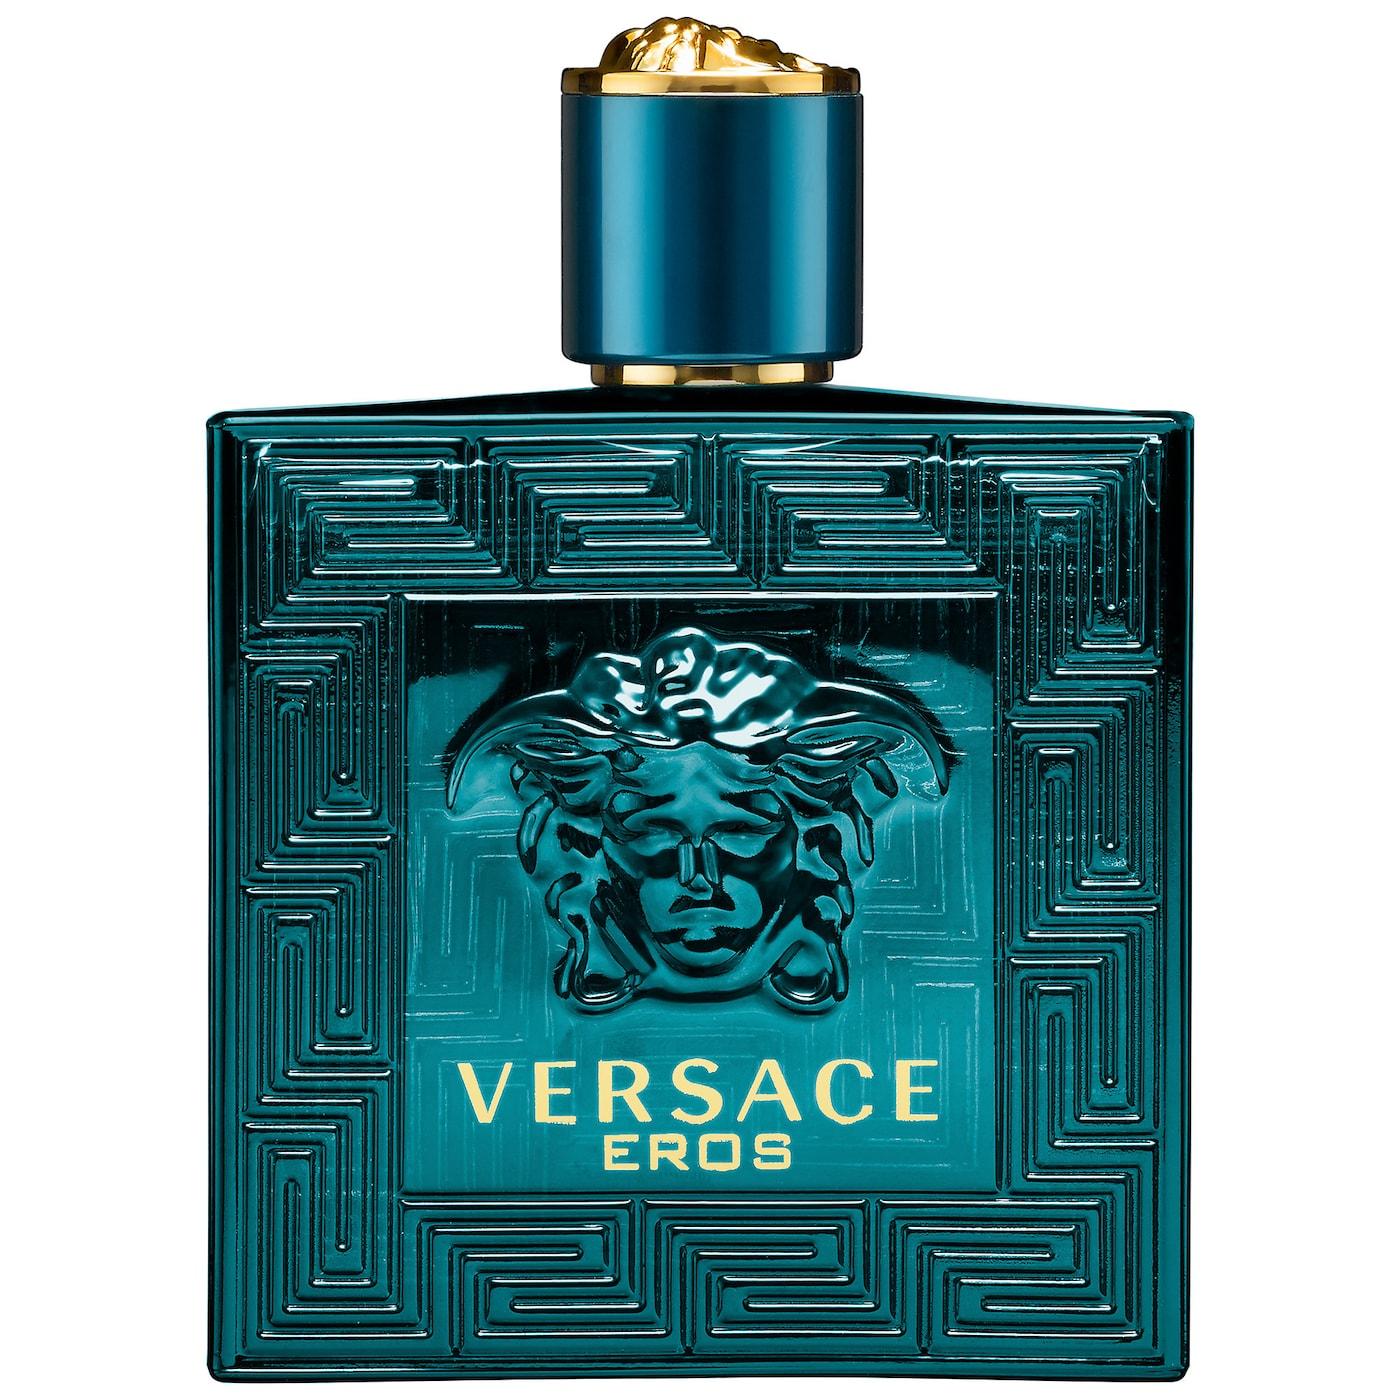 The 18 best colognes for men to try in 2023